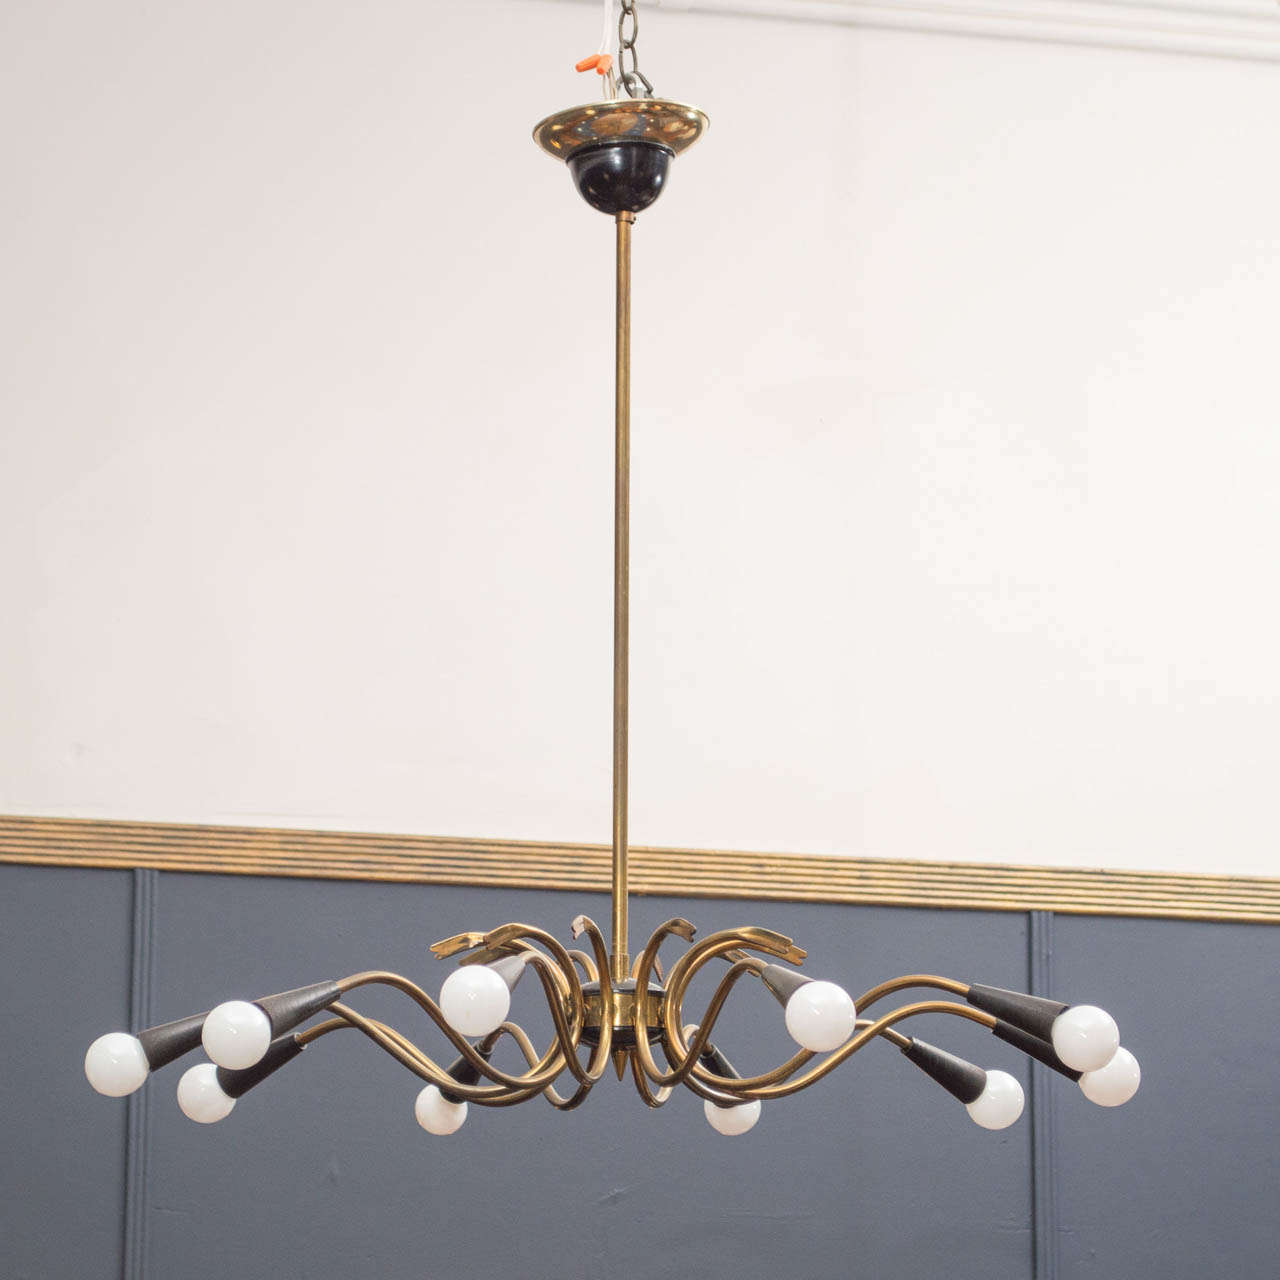 Stilnova style Italian ten light chandelier patinated brass with black painted sockets and ceiling collar. Very good original condition.